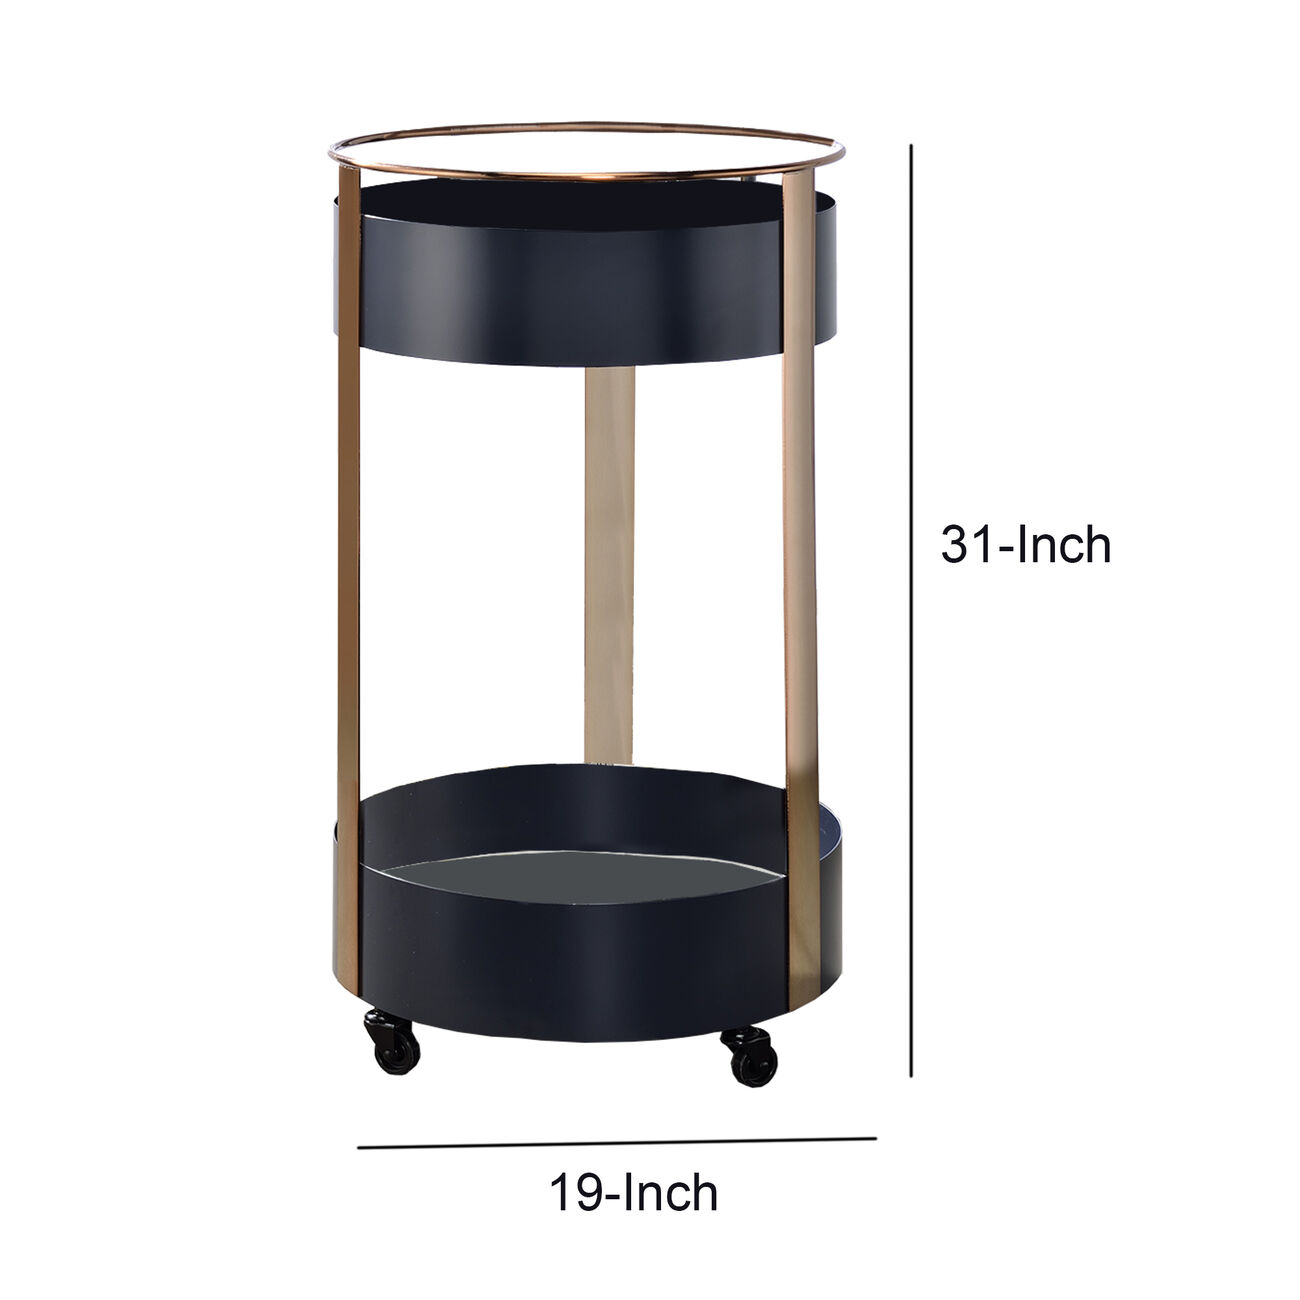 Round Metal Frame Serving Cart with Casters and Open Shelf, Black and Gold